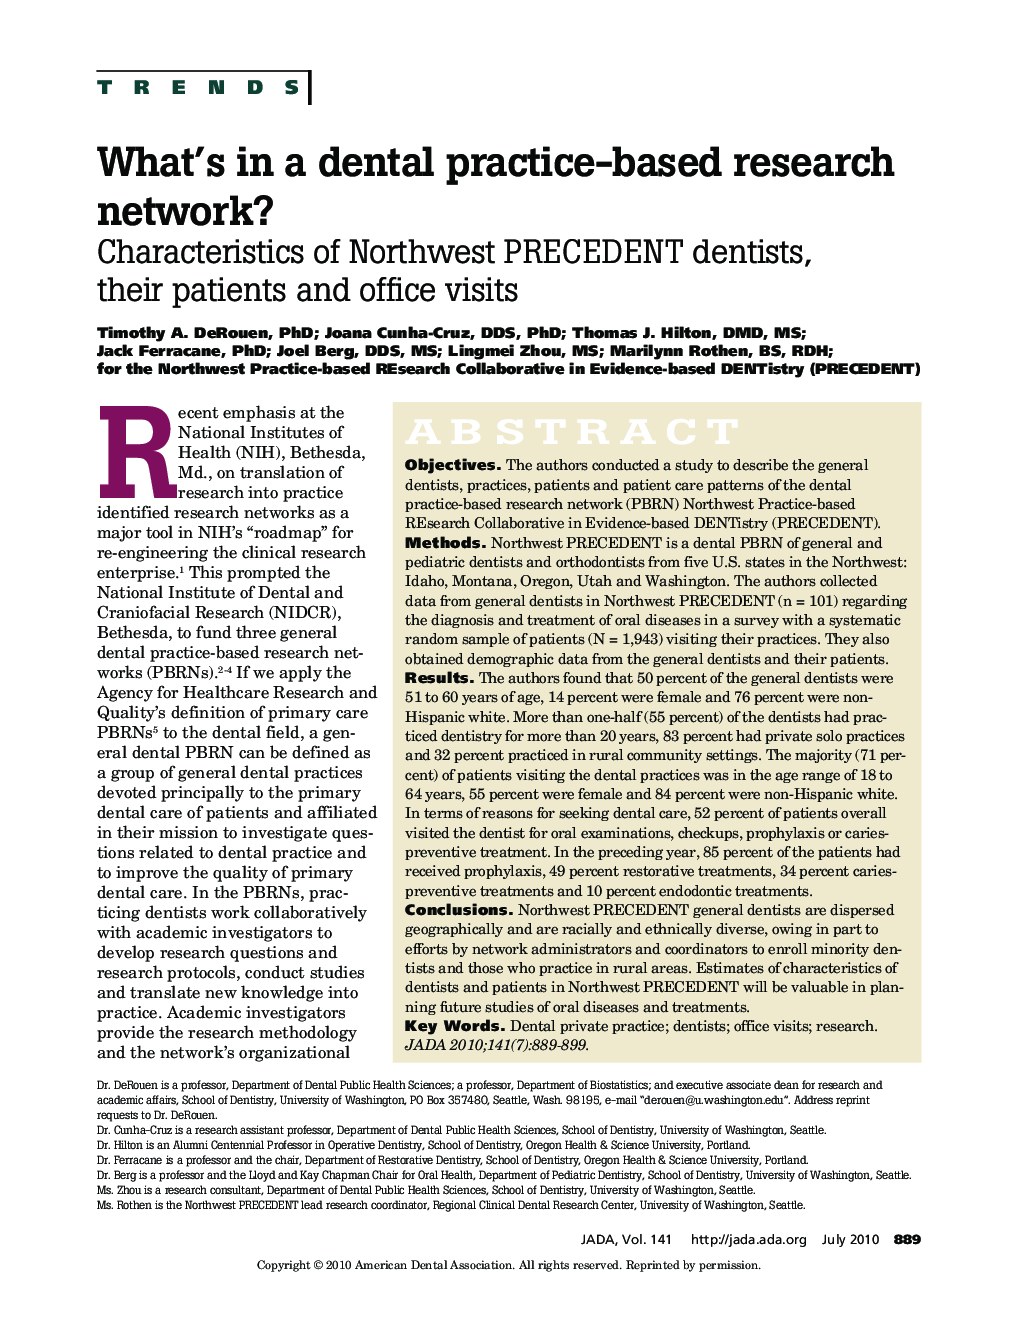 What's in a dental practice-based research network? : Characteristics of Northwest PRECEDENT dentists, their patients and office visits